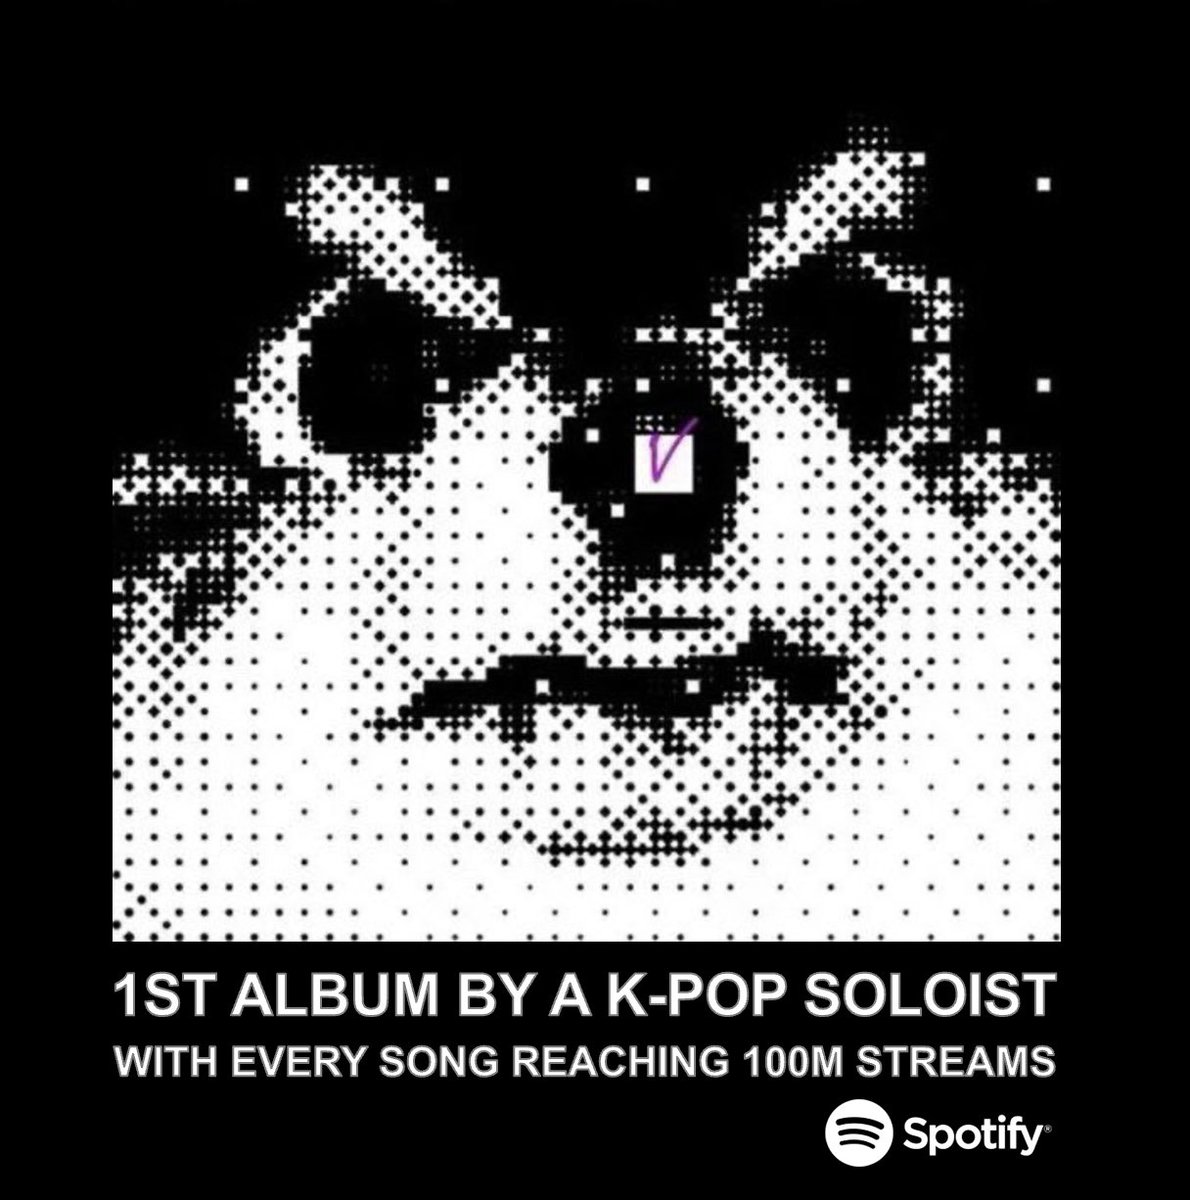 #V's ‘Layover’ is now the 1st Album by a K-Pop Soloist in Spotify History with every song surpassing 100 Million streams! 💪🥇👨‍🎤🇰🇷🐐👑🤍🖤